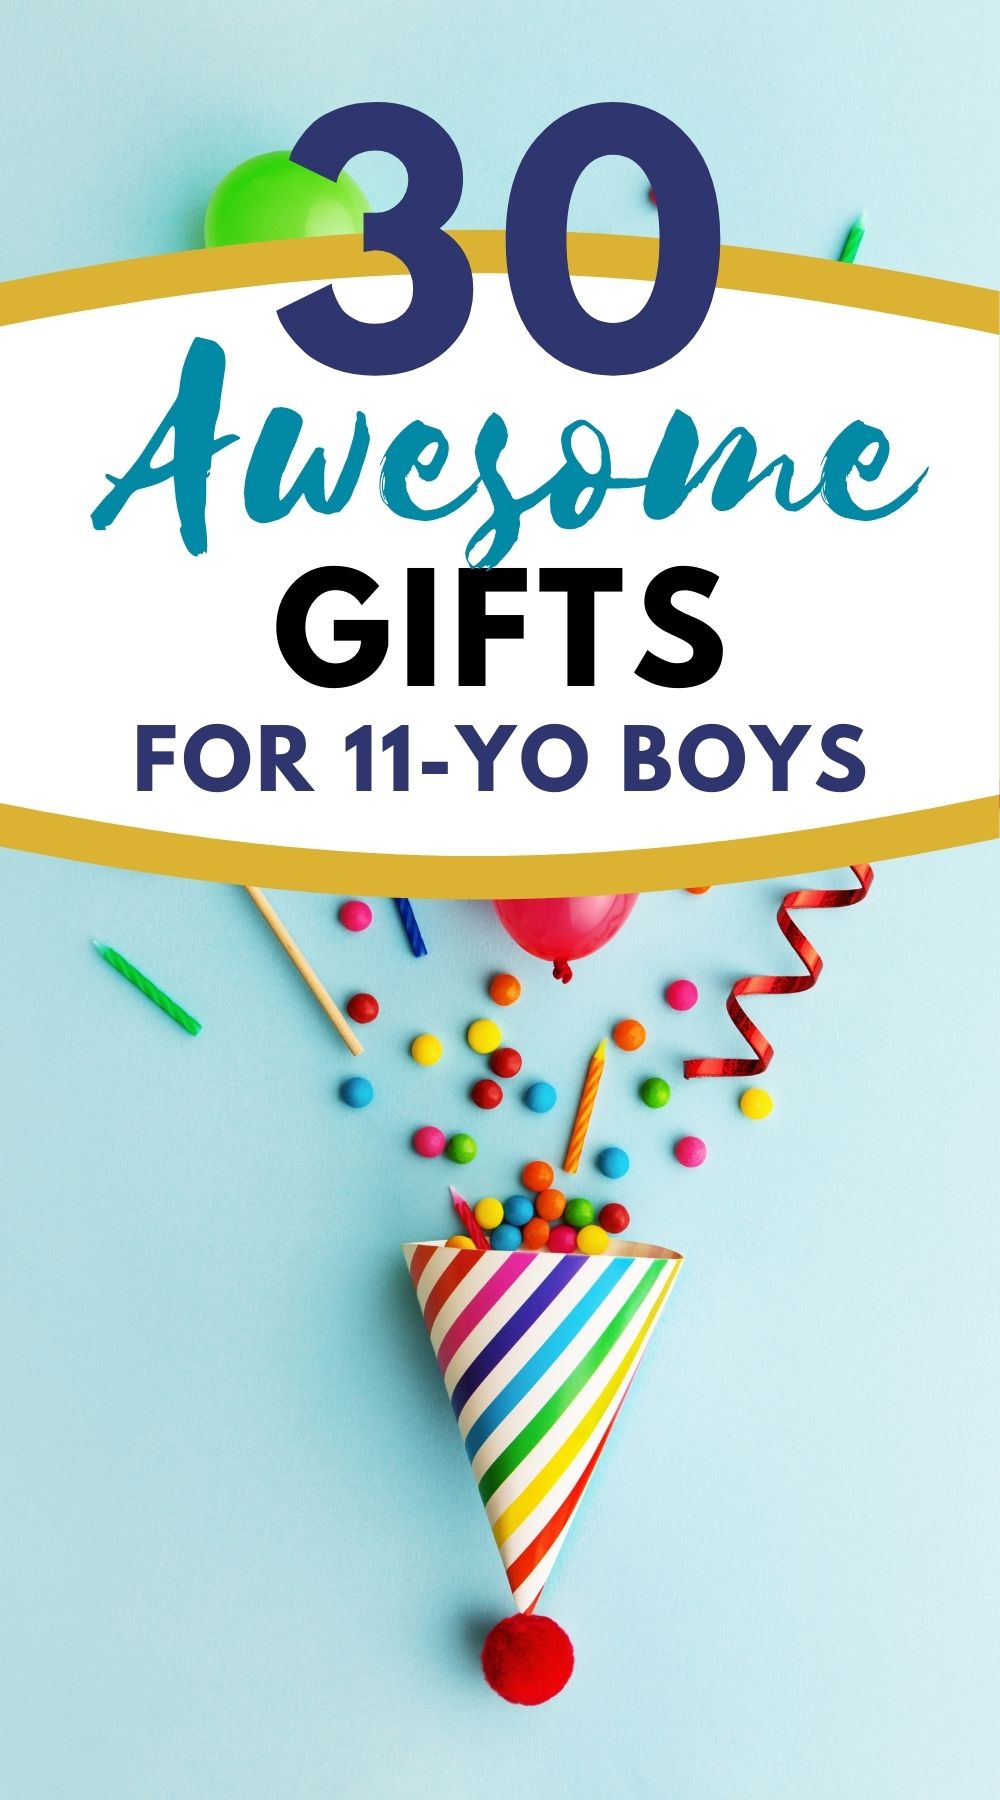 Gift ideas for 11-year-old boys